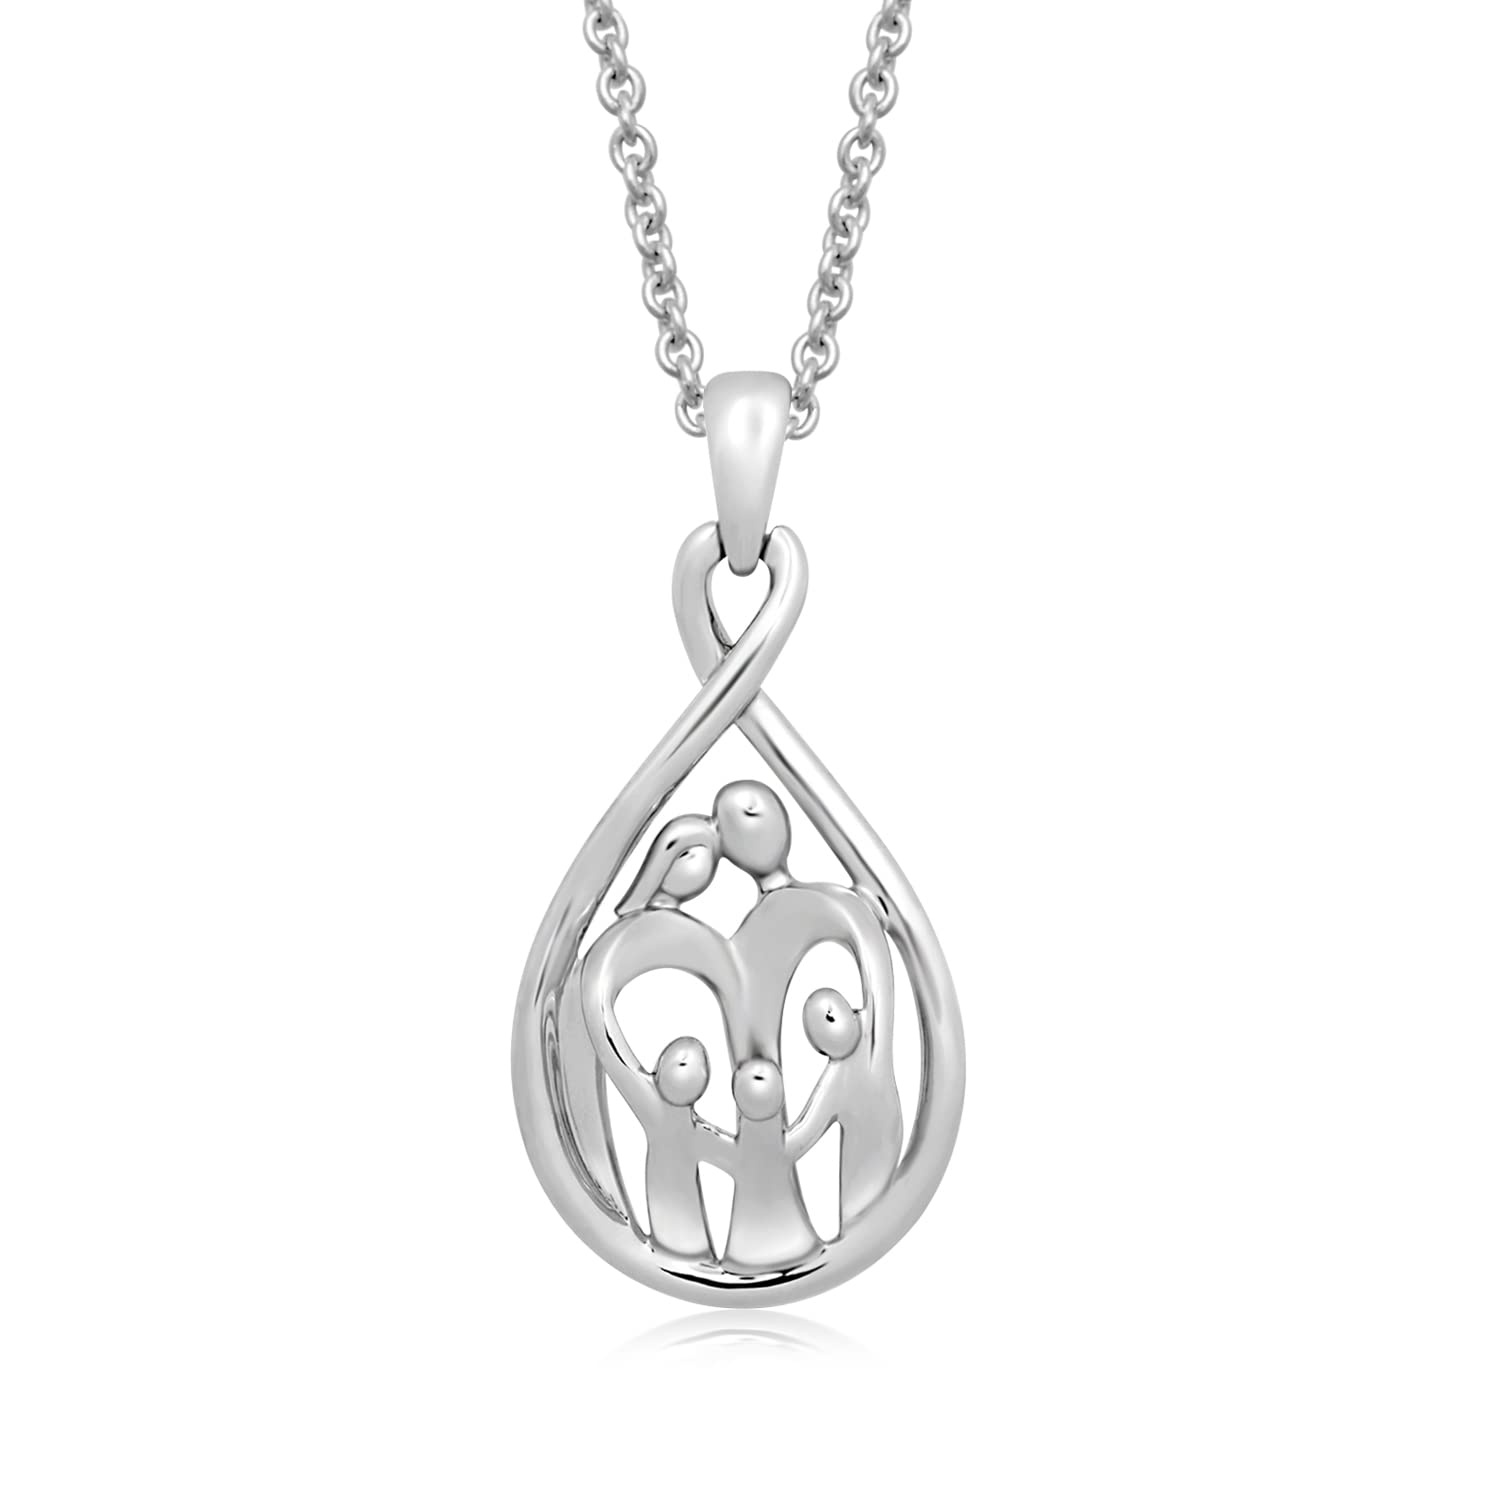 Jewelili Sterling Silver with Parent and Three Children Family Pendant Necklace, 18" Cable Chain - image 1 of 5